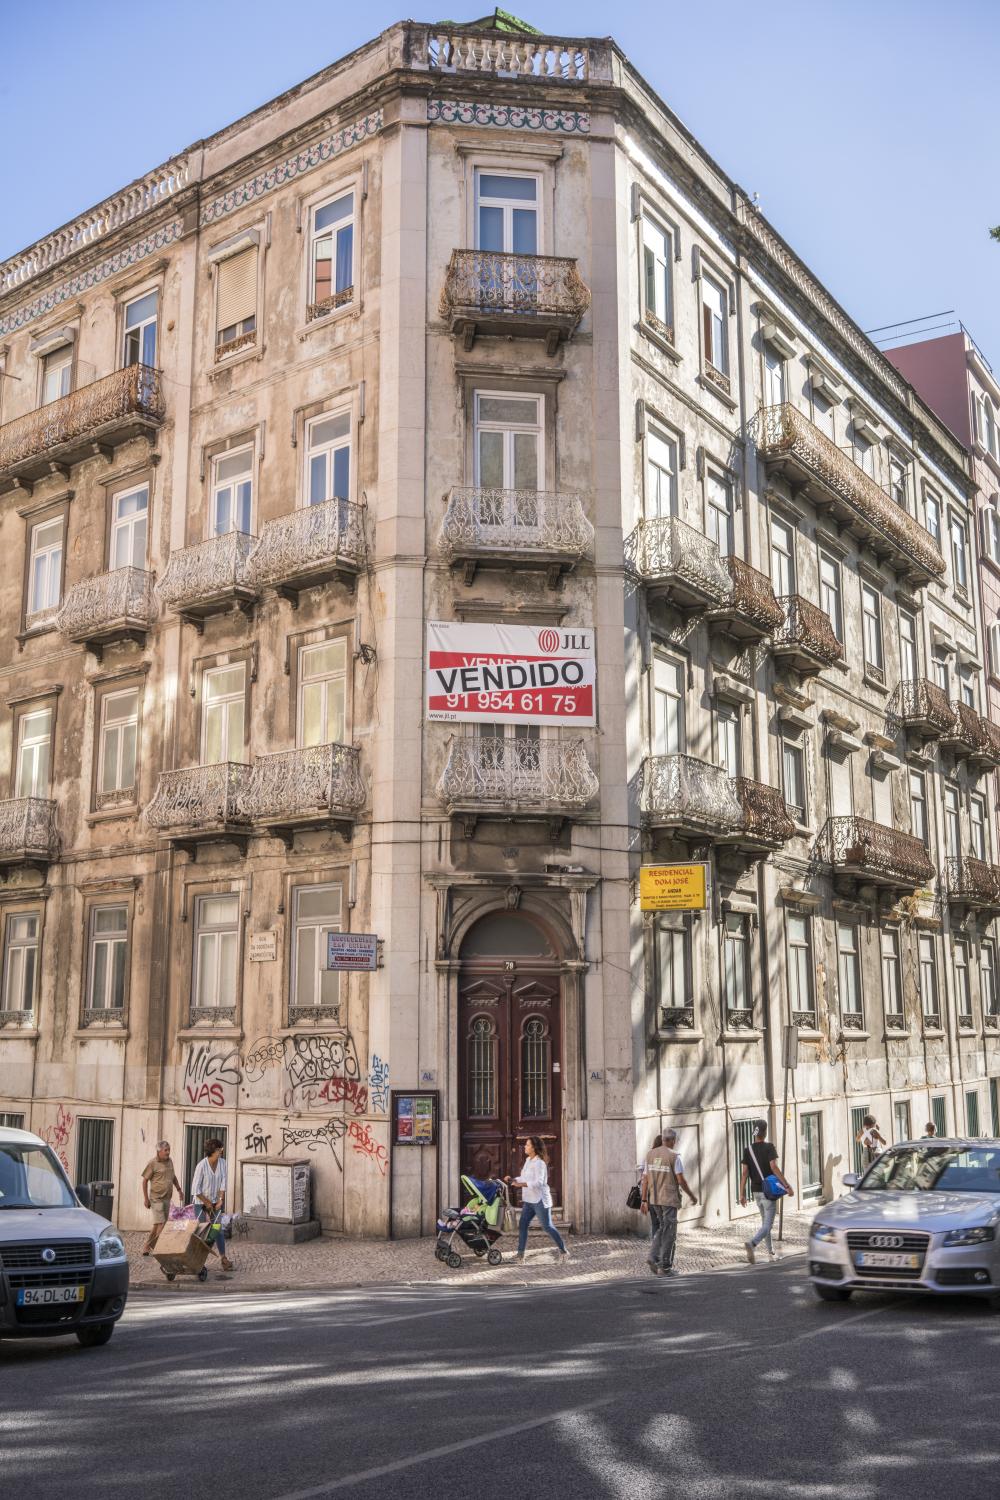 Lisbon - Recently sold building in Marques de Pombal, a...